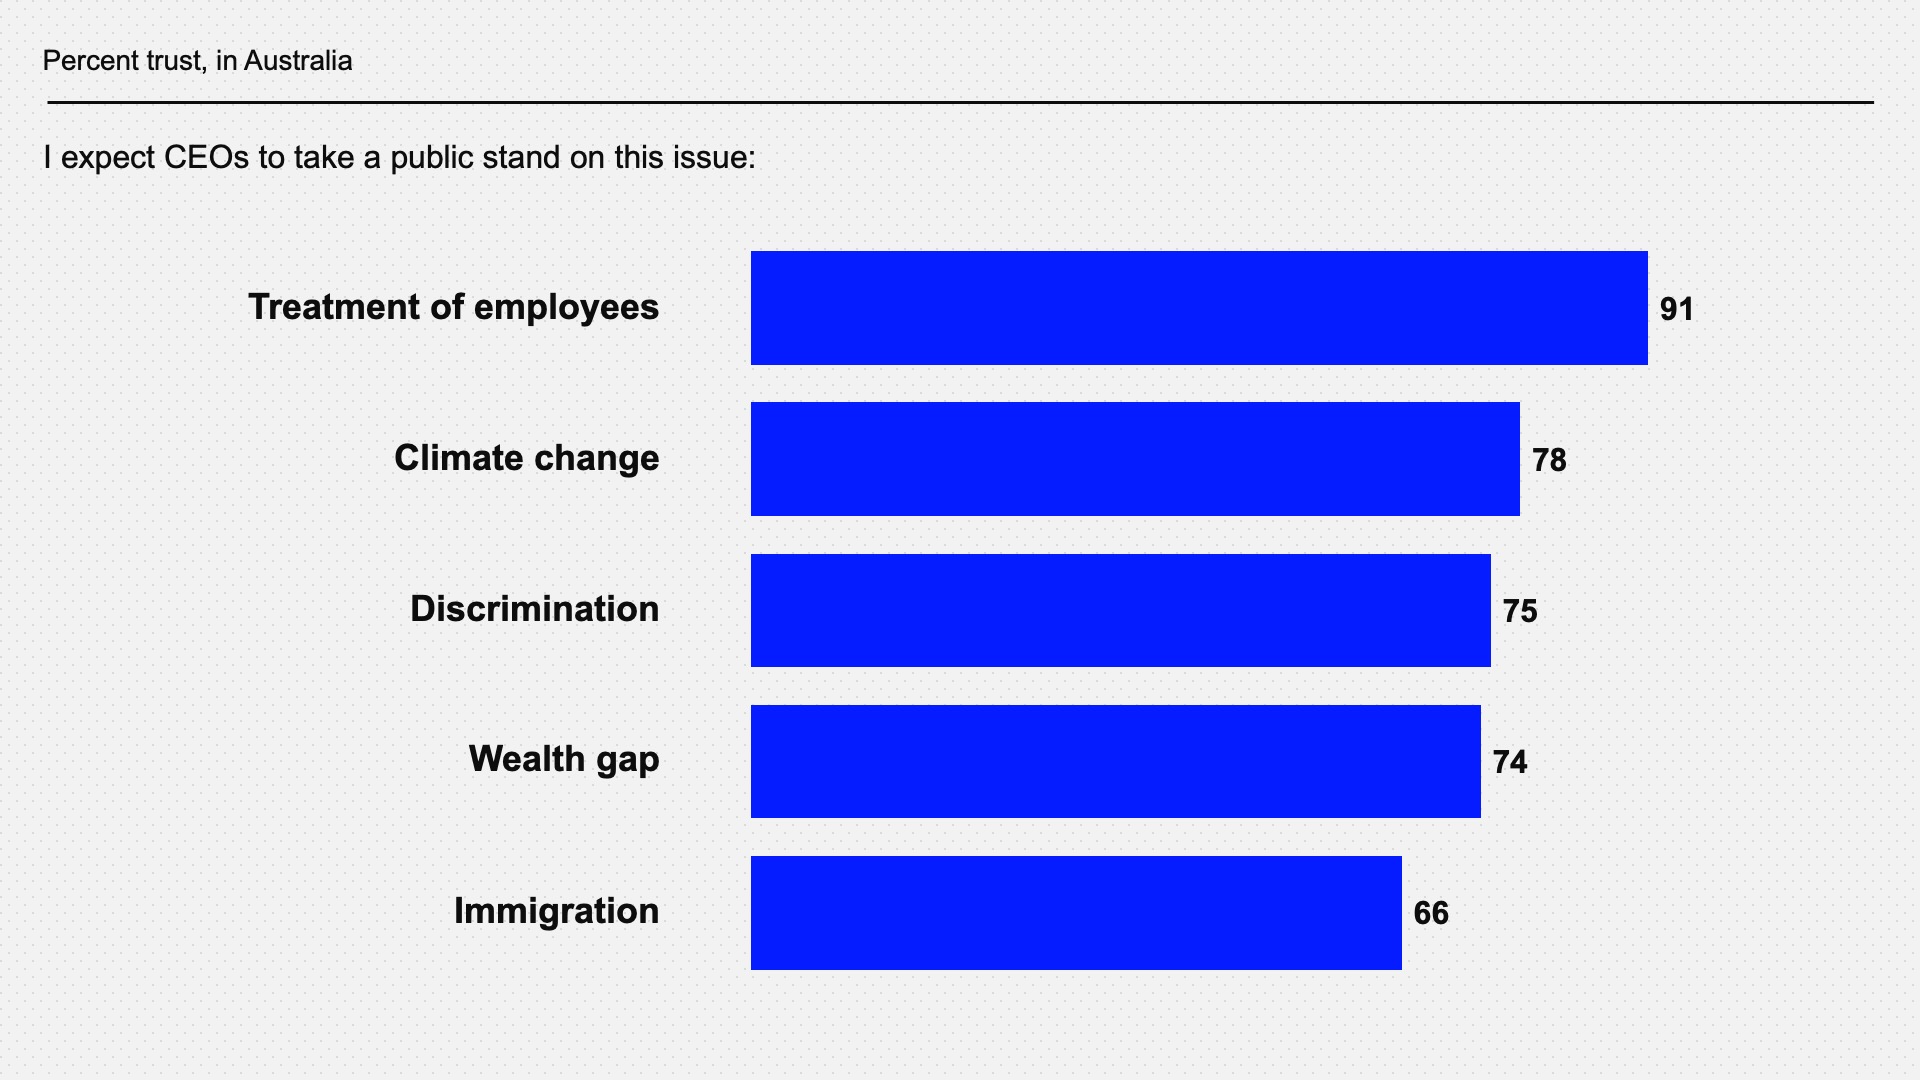 In Australia, CEOs most expected to act on employees, climate, and discrimination biug